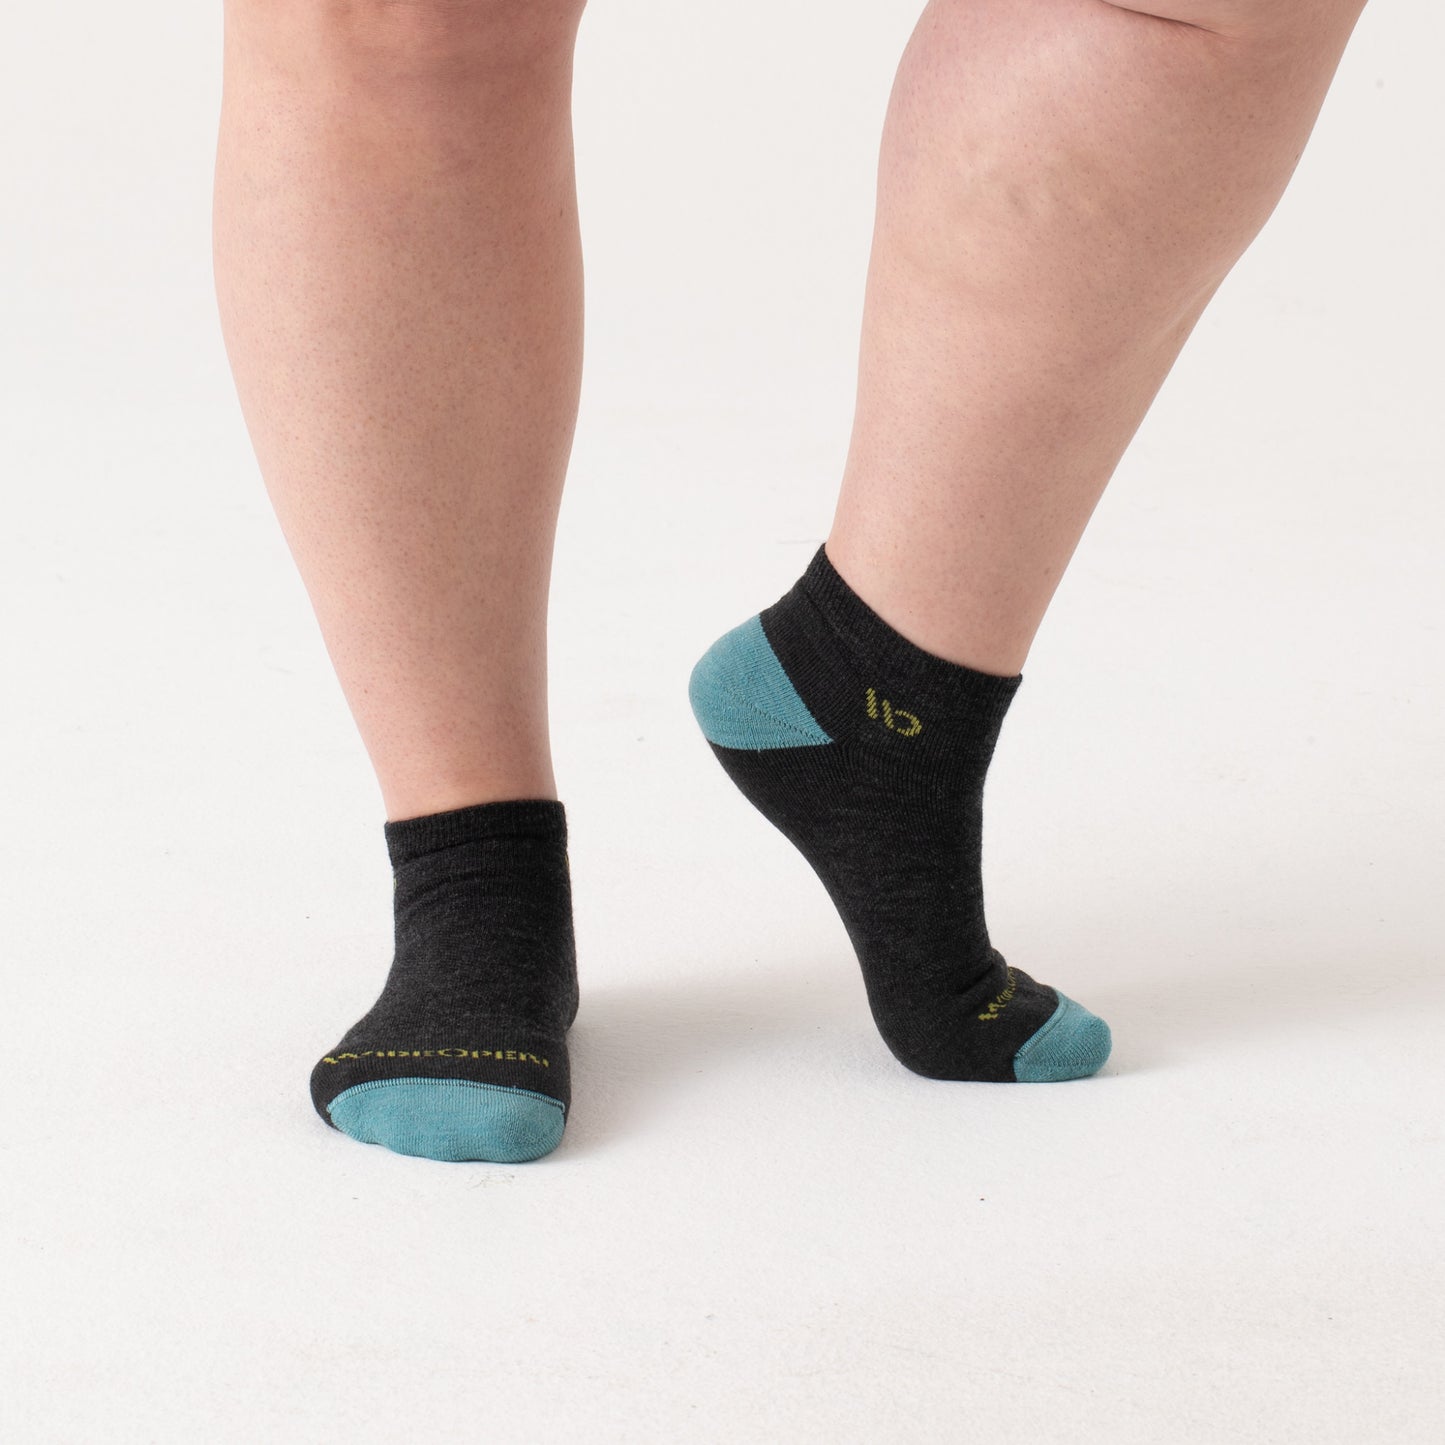 On model: No shows with aqua heel/toe and yellow logo, with charcoal body --Charcoal